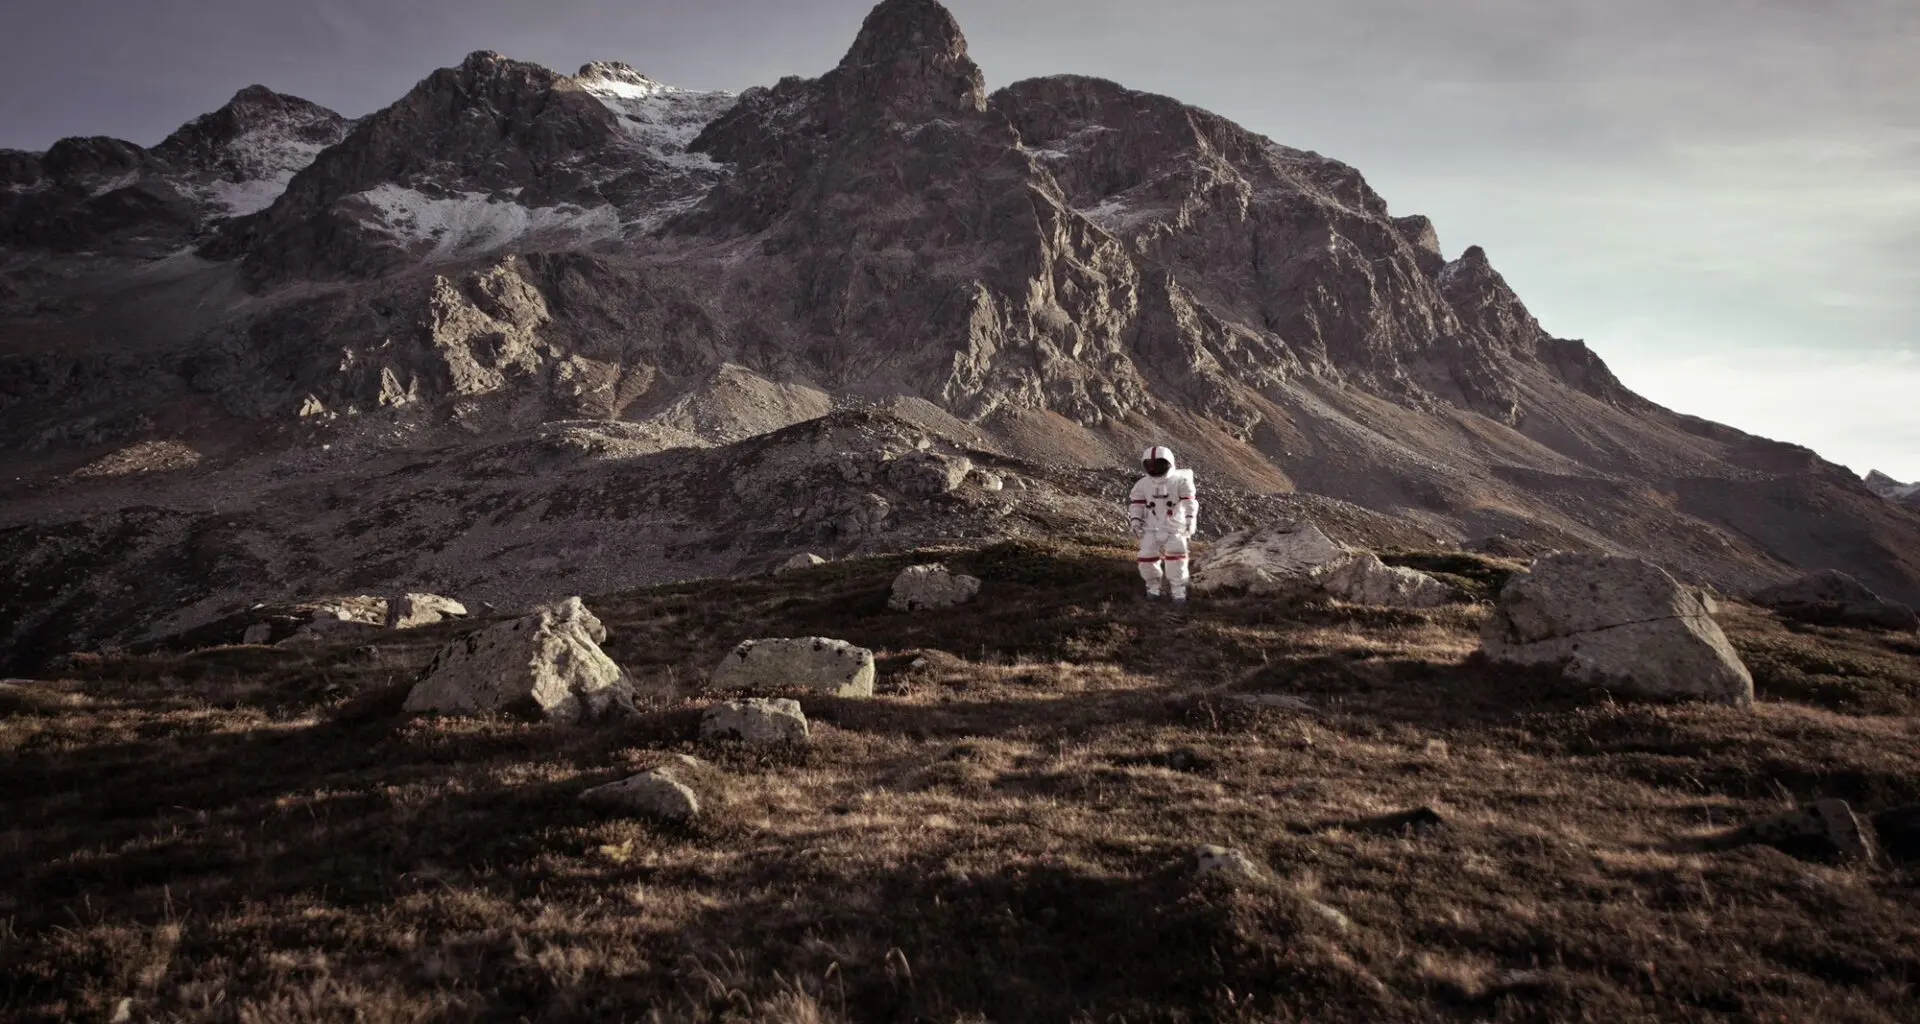 A person in a white space suit stands on a rocky terrain with mountains in the background, evoking the feel of a space colony.